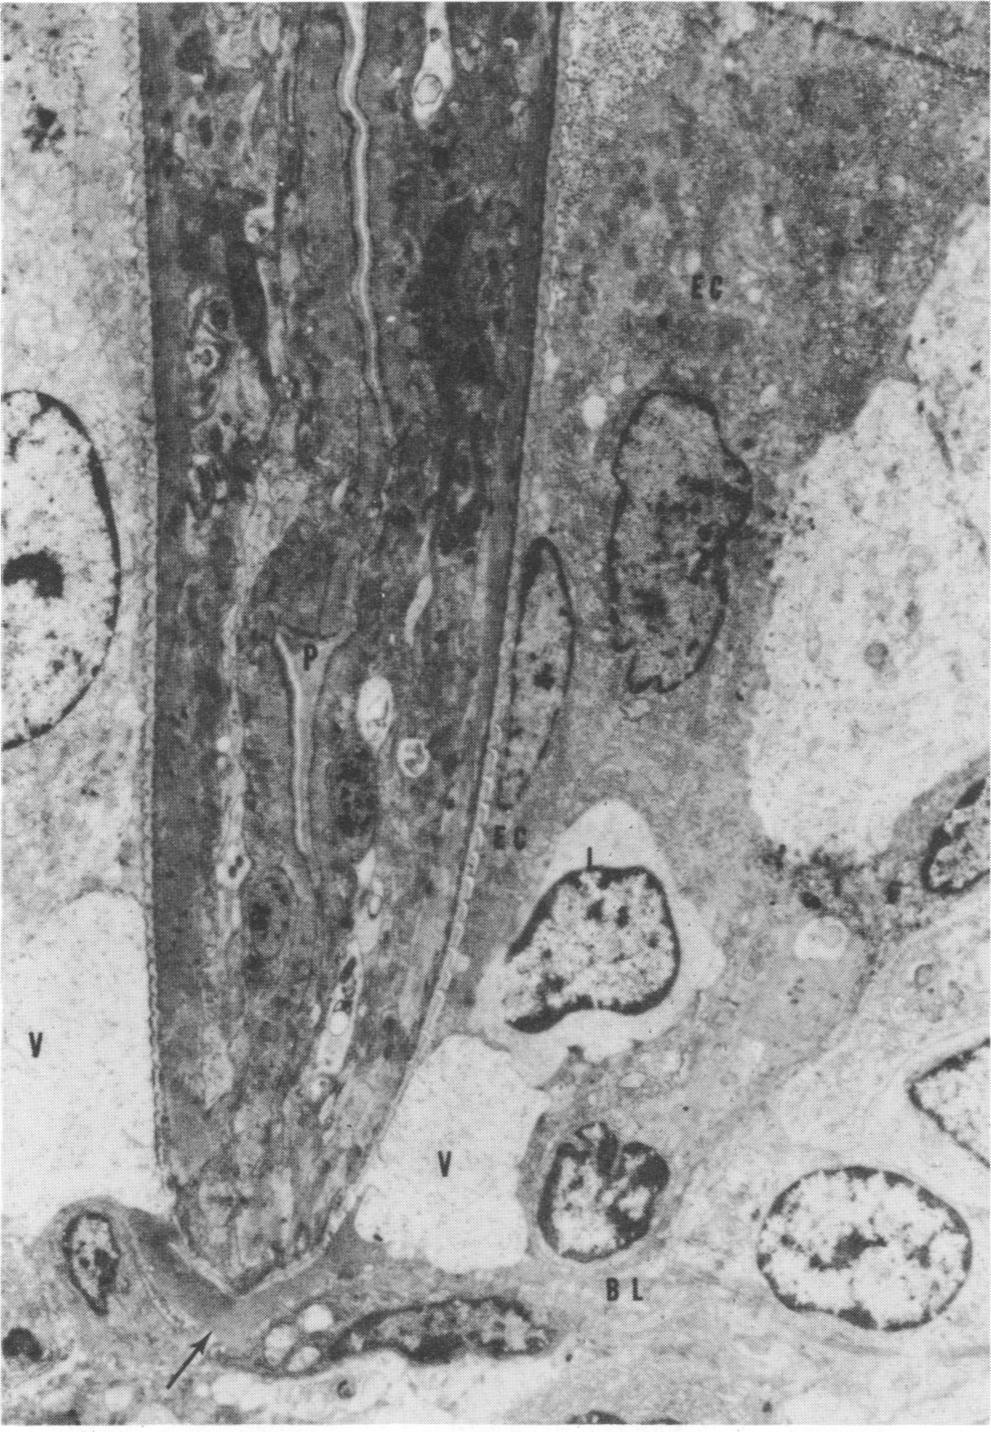 VOL. S, 1992 INTESTINAL CAPILLARIASIS 127 FIG. 13. Electron-microscopic view of the penetrating site of the parasite (P) in gerbil jejunal epithelium.